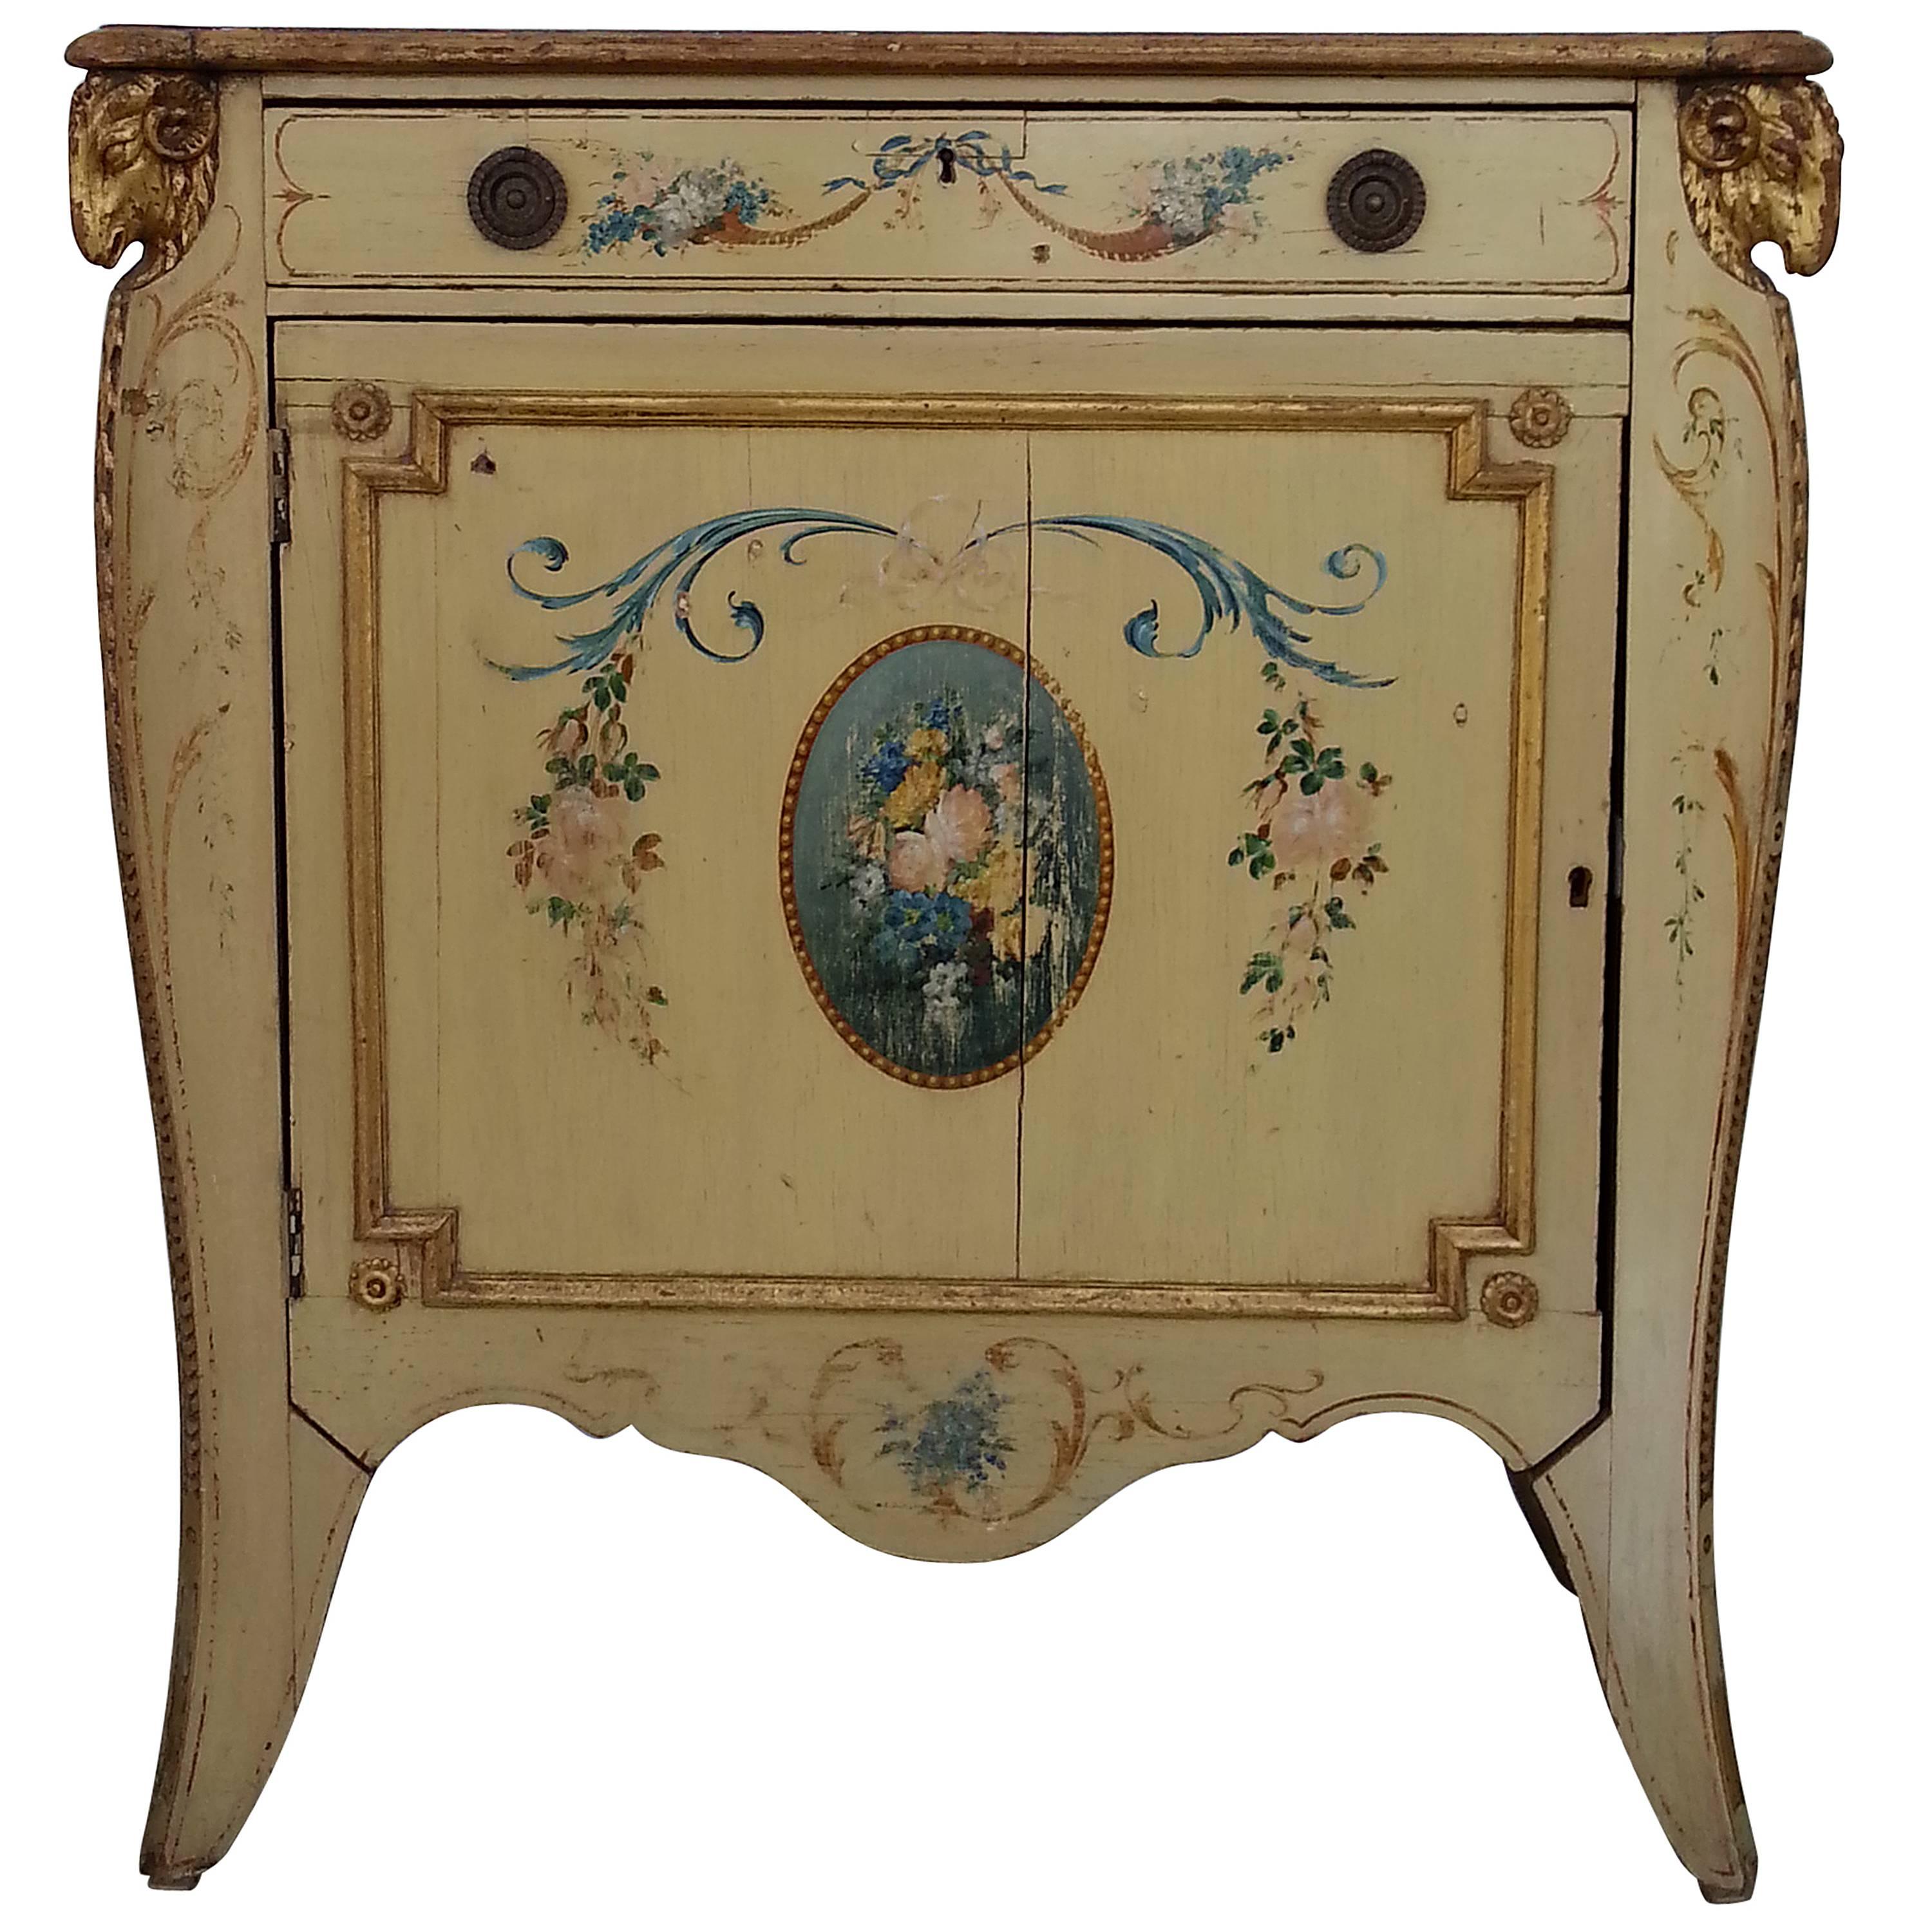 19th Century Neoclassical Italian Painted Commode in the English Adams Taste